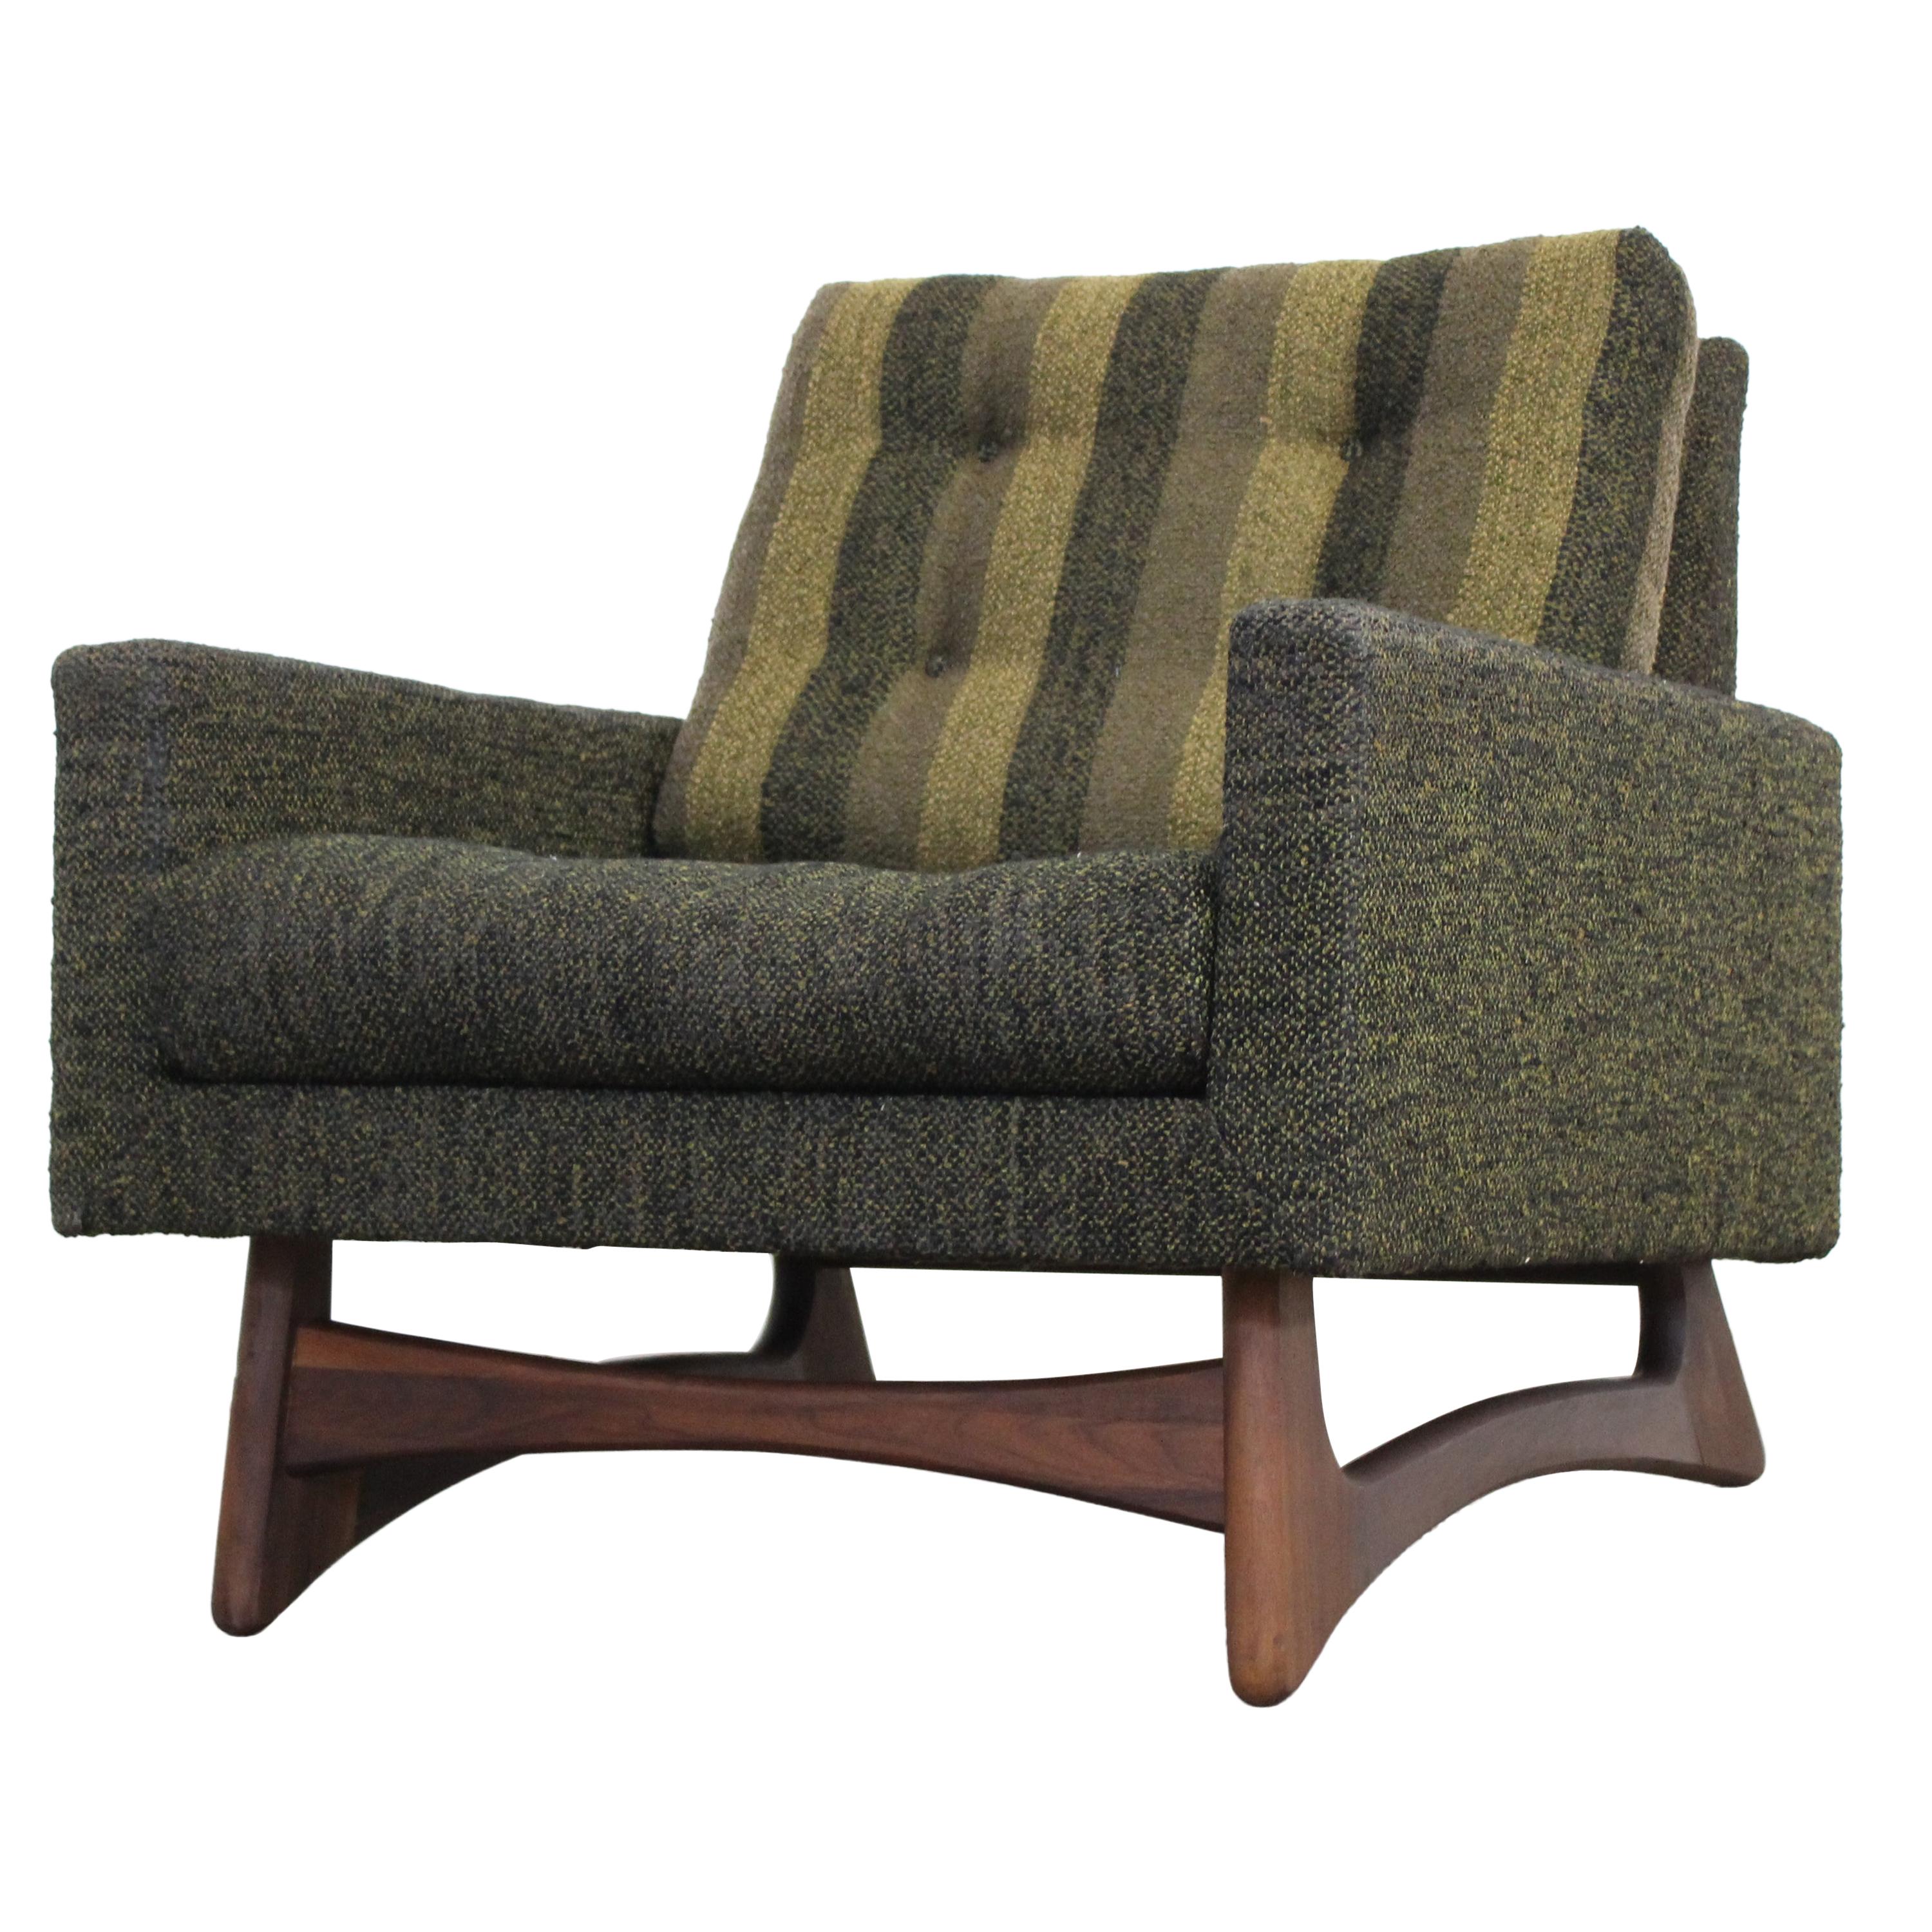 Mid-Century Modern Adrian Pearsall Lounge Chair by Craft Associates, 2406